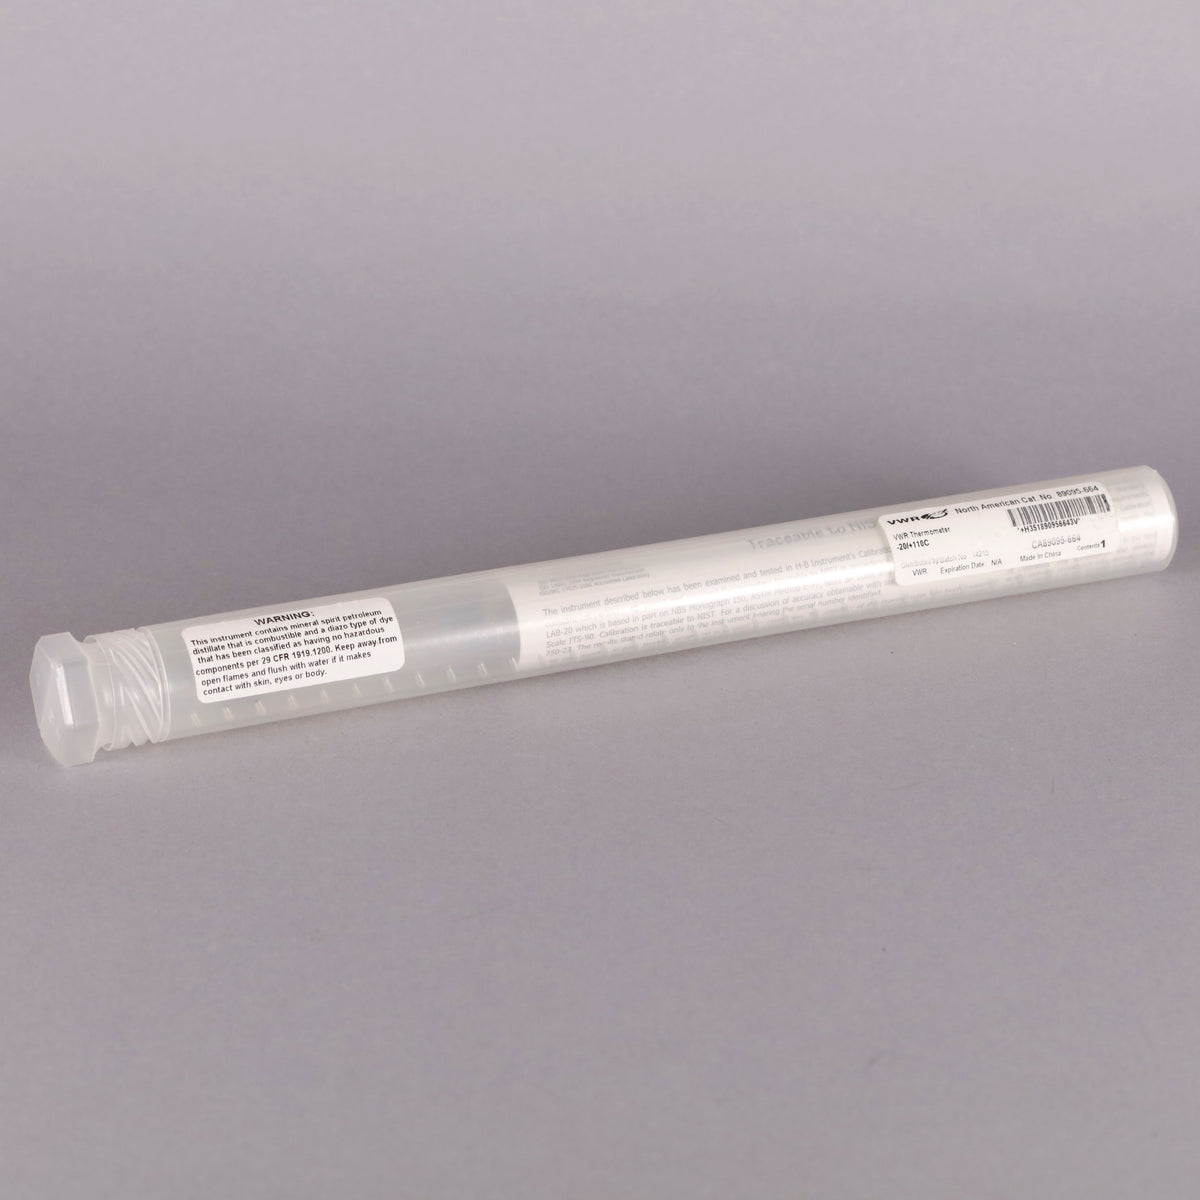 Fisherbrand Dry Block/Incubator Thermometers:Thermometers and